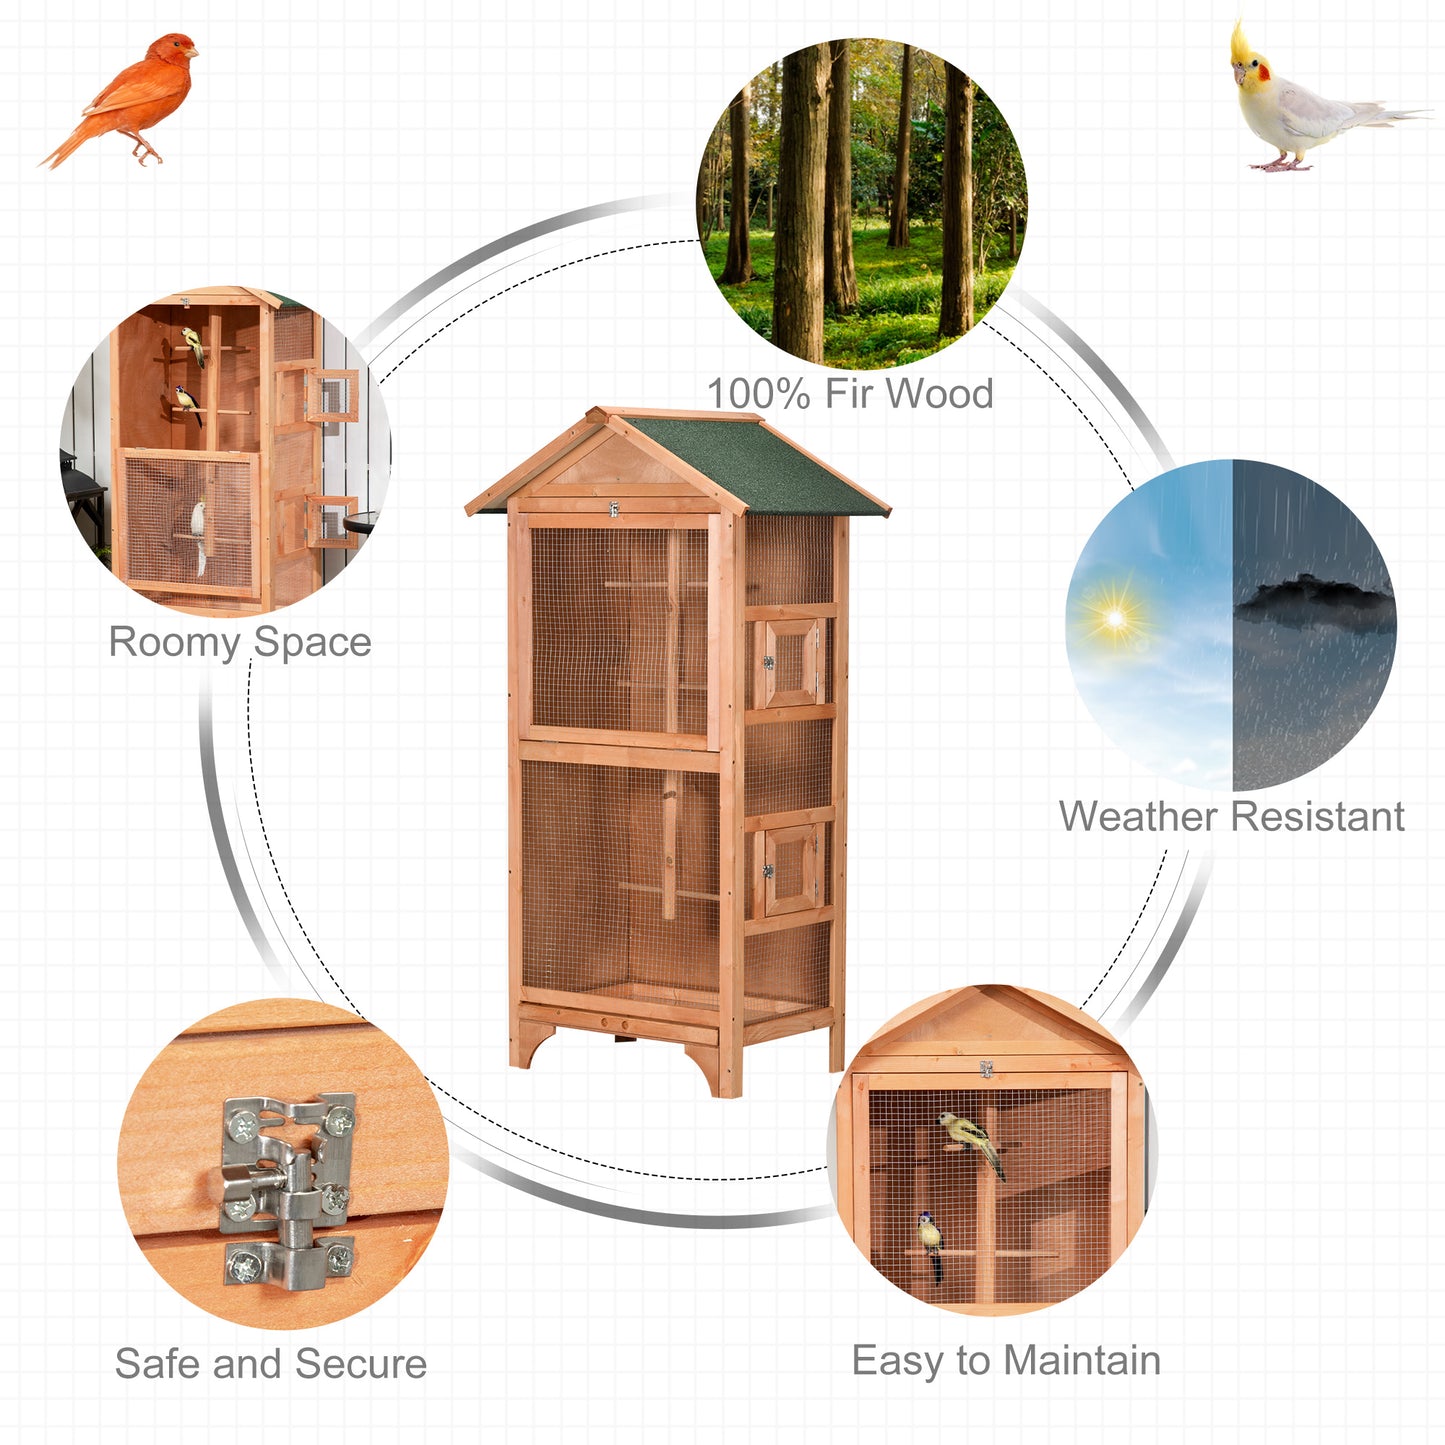 Wooden Bird Aviary Parrot Cage Pet Furniture with Removable Bottom Tray, 2 Doors, Asphalt Roof, 4 Perches, Orange at Gallery Canada